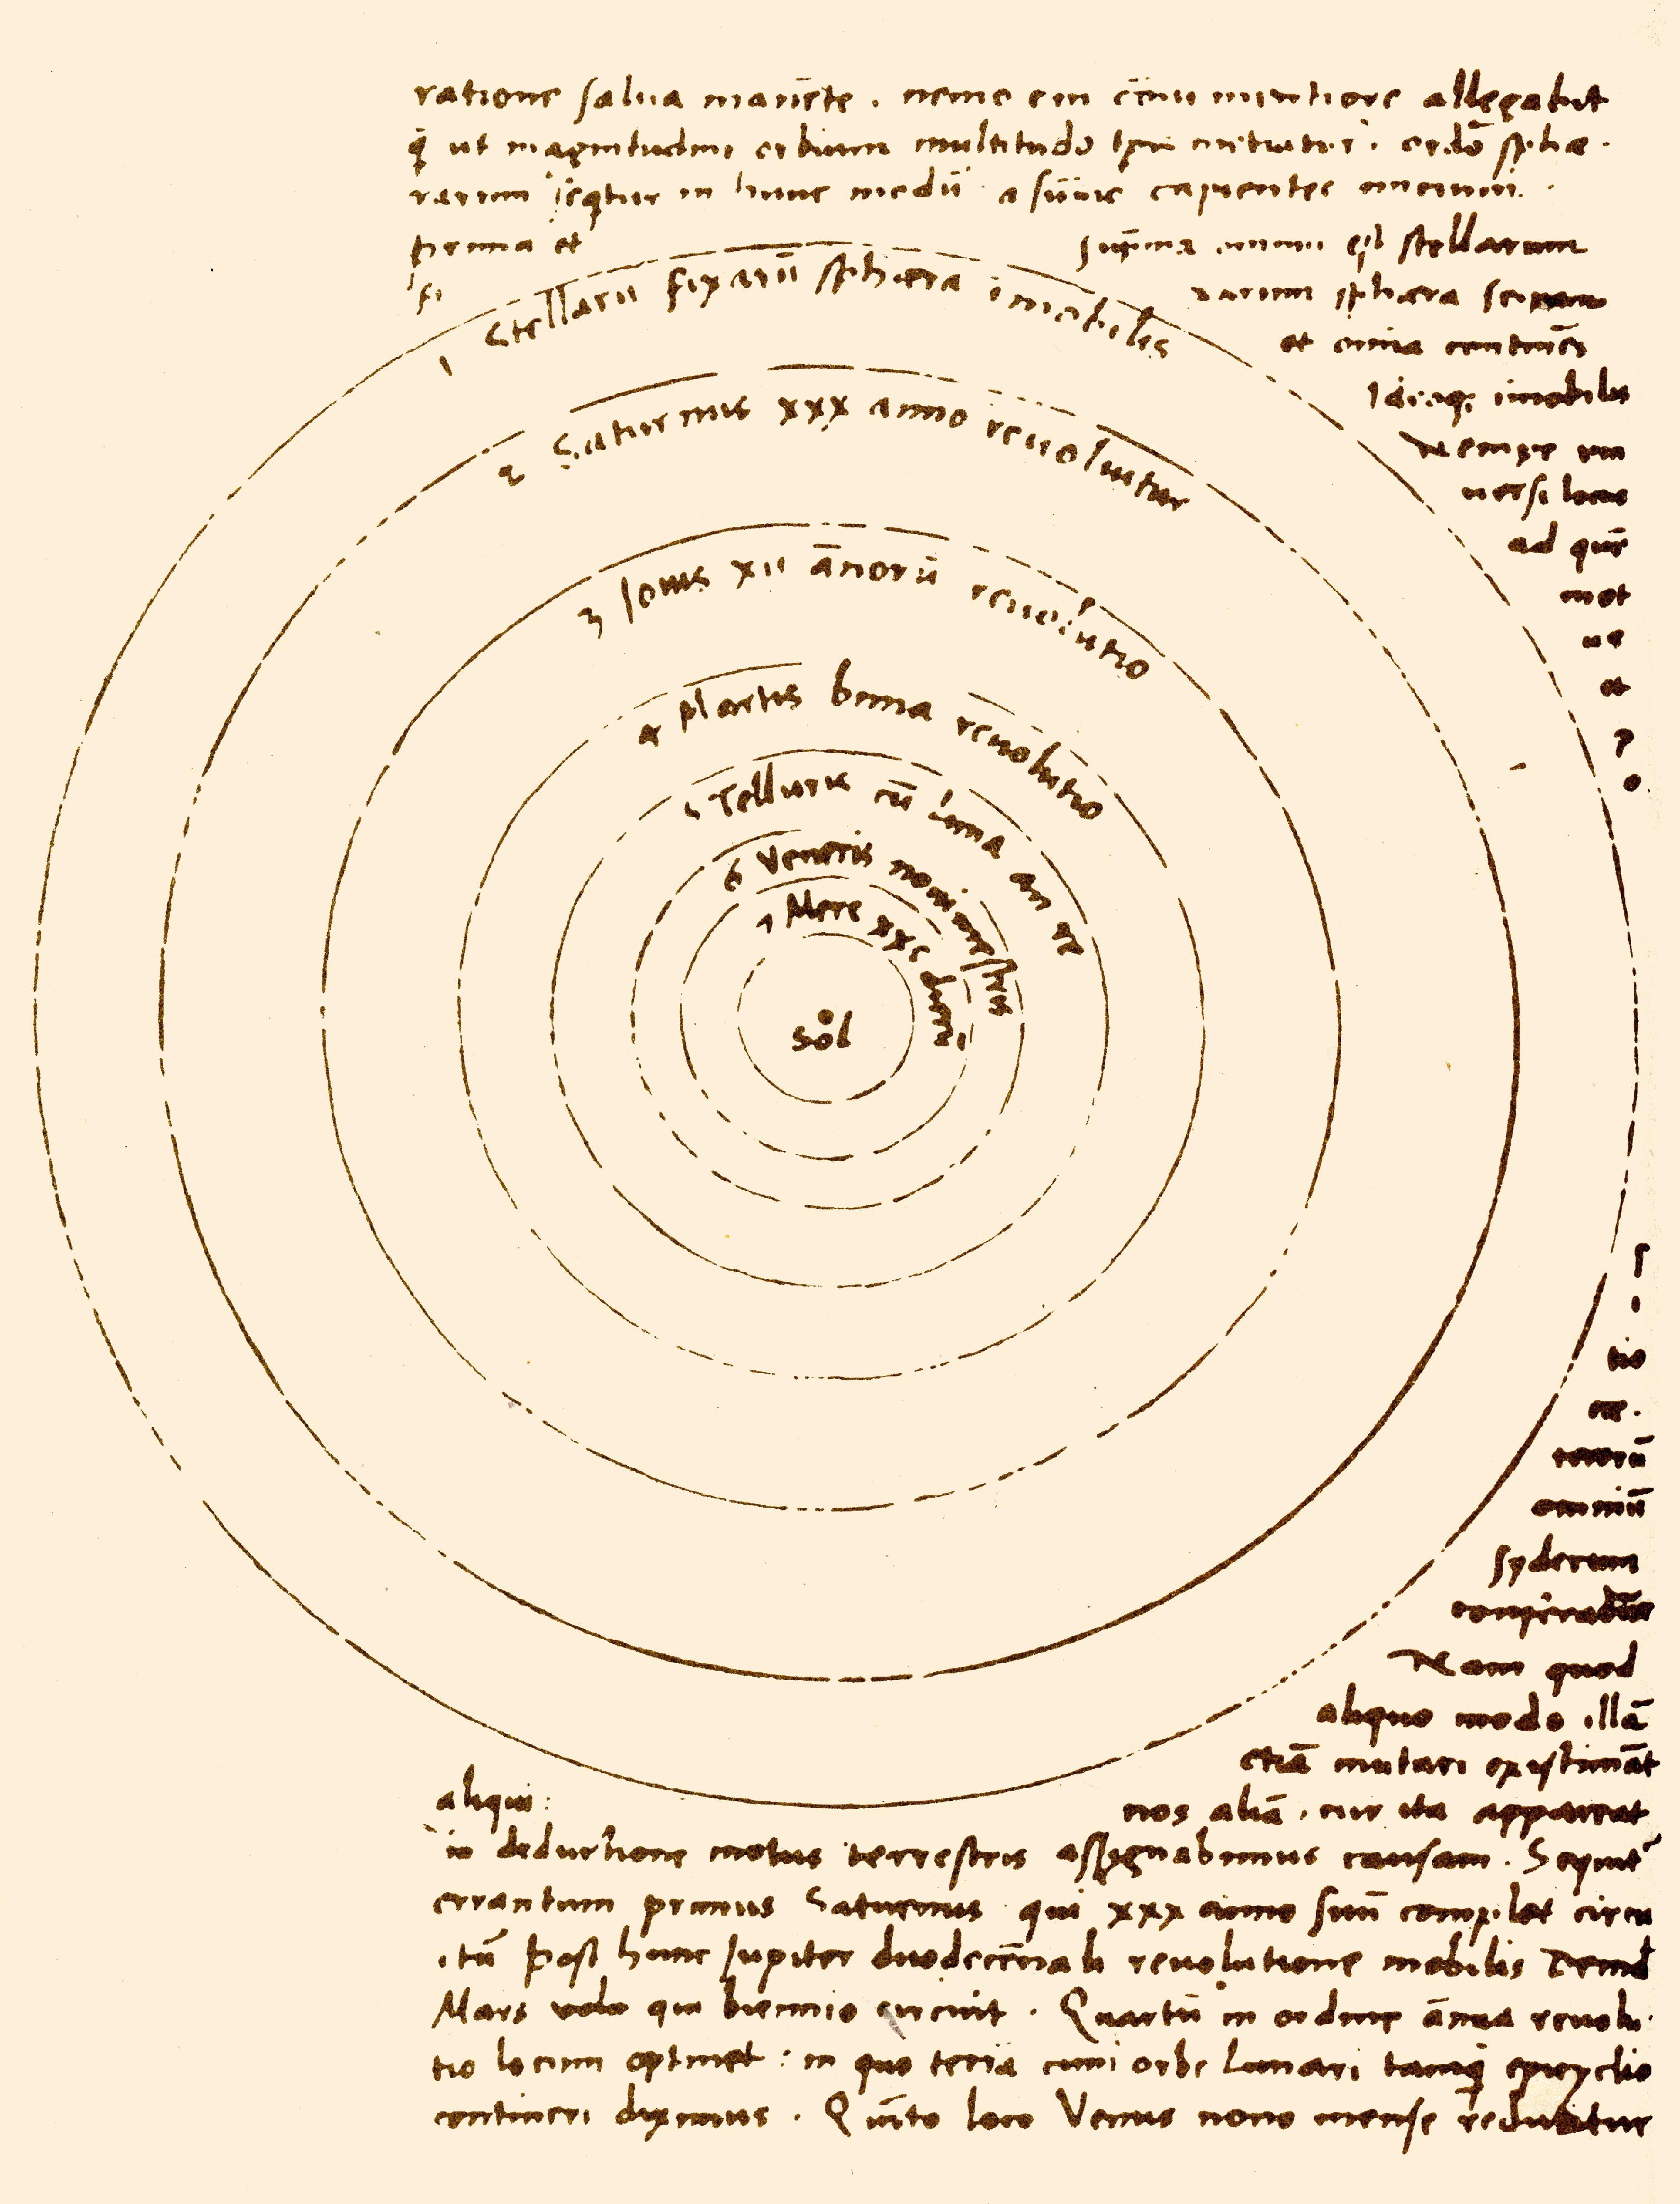 This year is the 550th anniversary of the birth of the renowned Polish astronomer Nicolaus Copernicus. The Hong Kong Space Museum will launch a special exhibition "Nicolaus Copernicus: Life and Work" starting tomorrow (June 21). In 1543, he published "De revolutionibus orbium coelestium" (On the Revolutions of the Heavenly Spheres) on heliocentrism, which proposed that the Sun is the centre of planetary motions, sparking a revolution in astronomy.